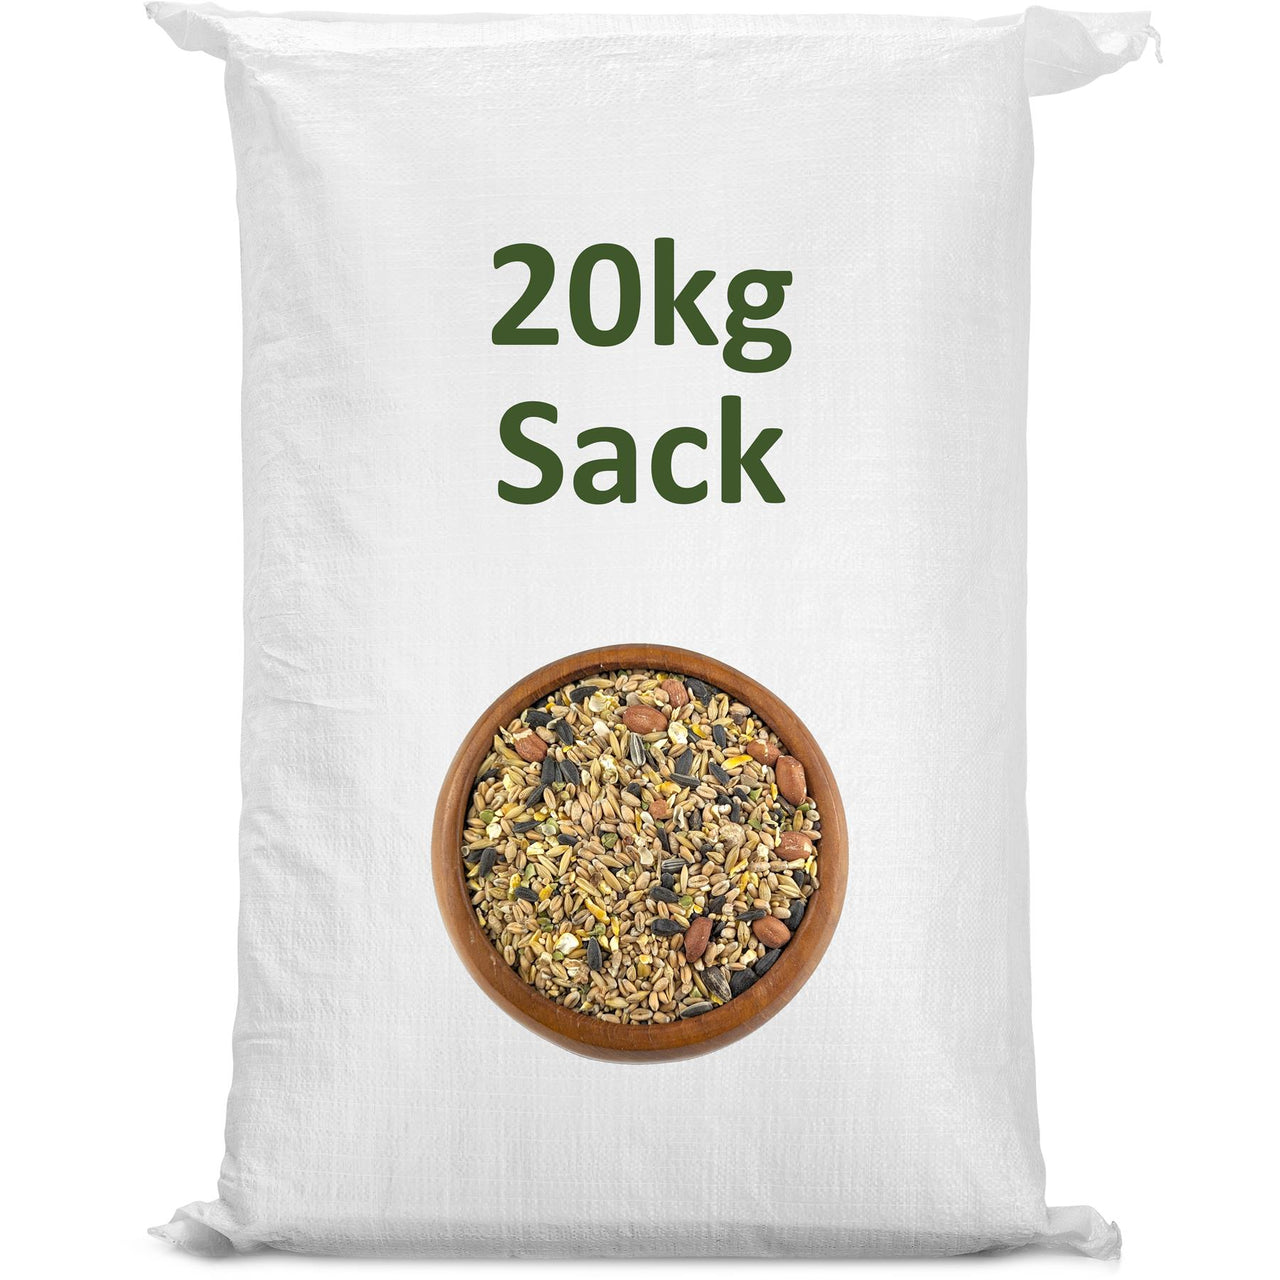 Colonels - Winterfood, 20kg Sack